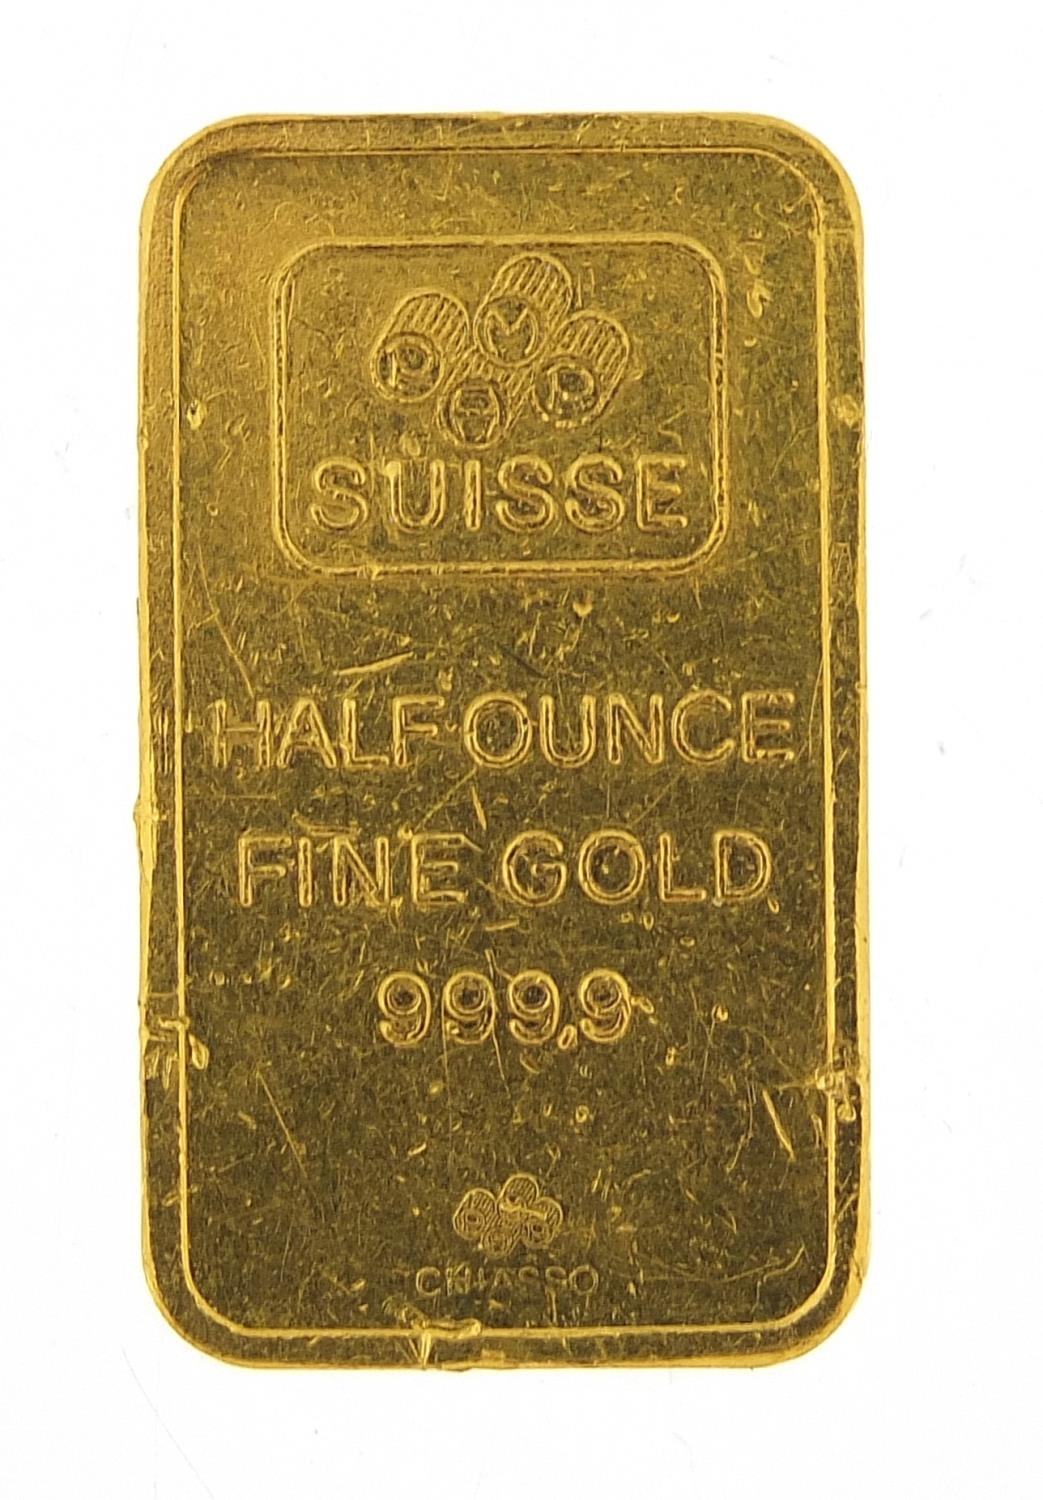 999.9 fine gold half ounce ingot 15.6g - this lot is sold without buyer?s premium, the hammer - Image 2 of 2